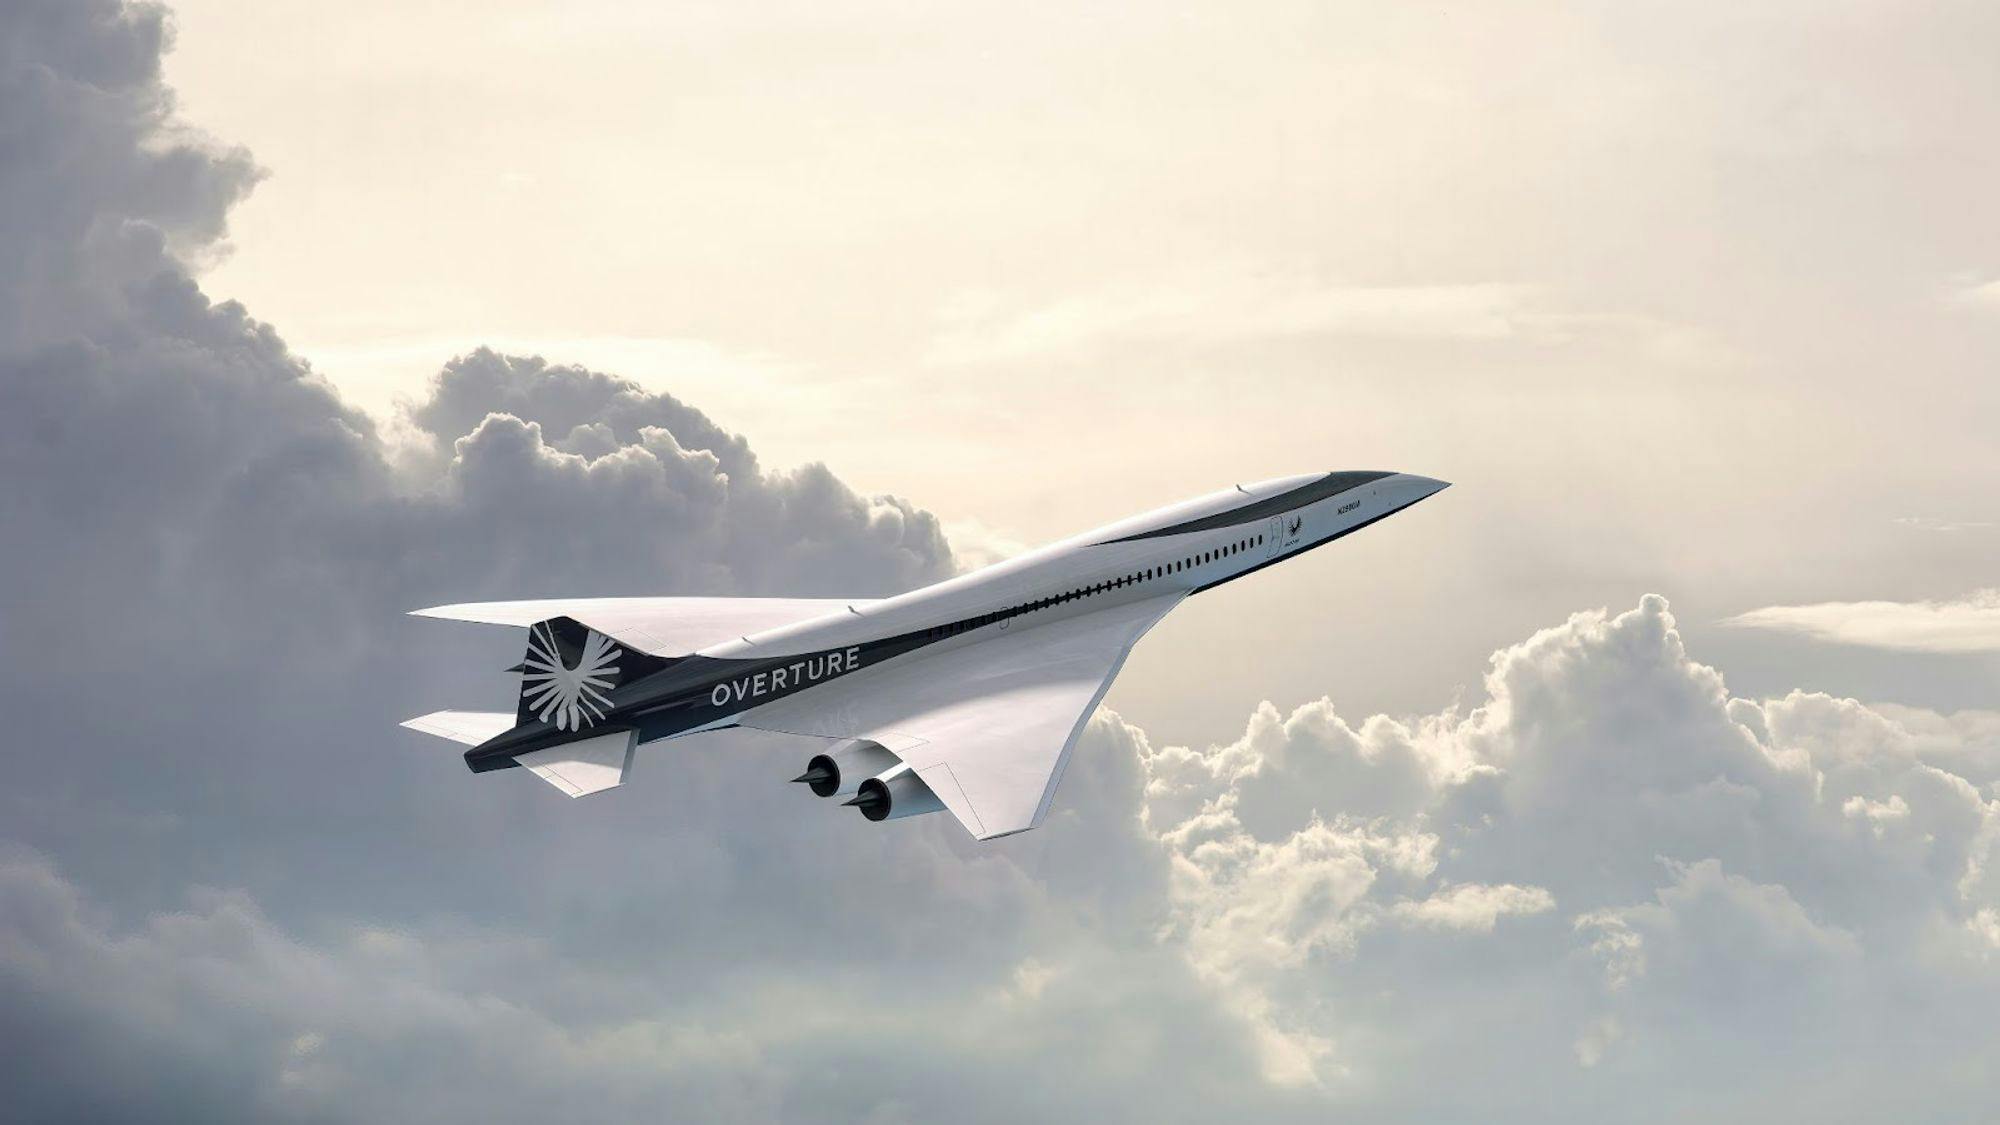 Spike S-512 could be the world's first supersonic business jet